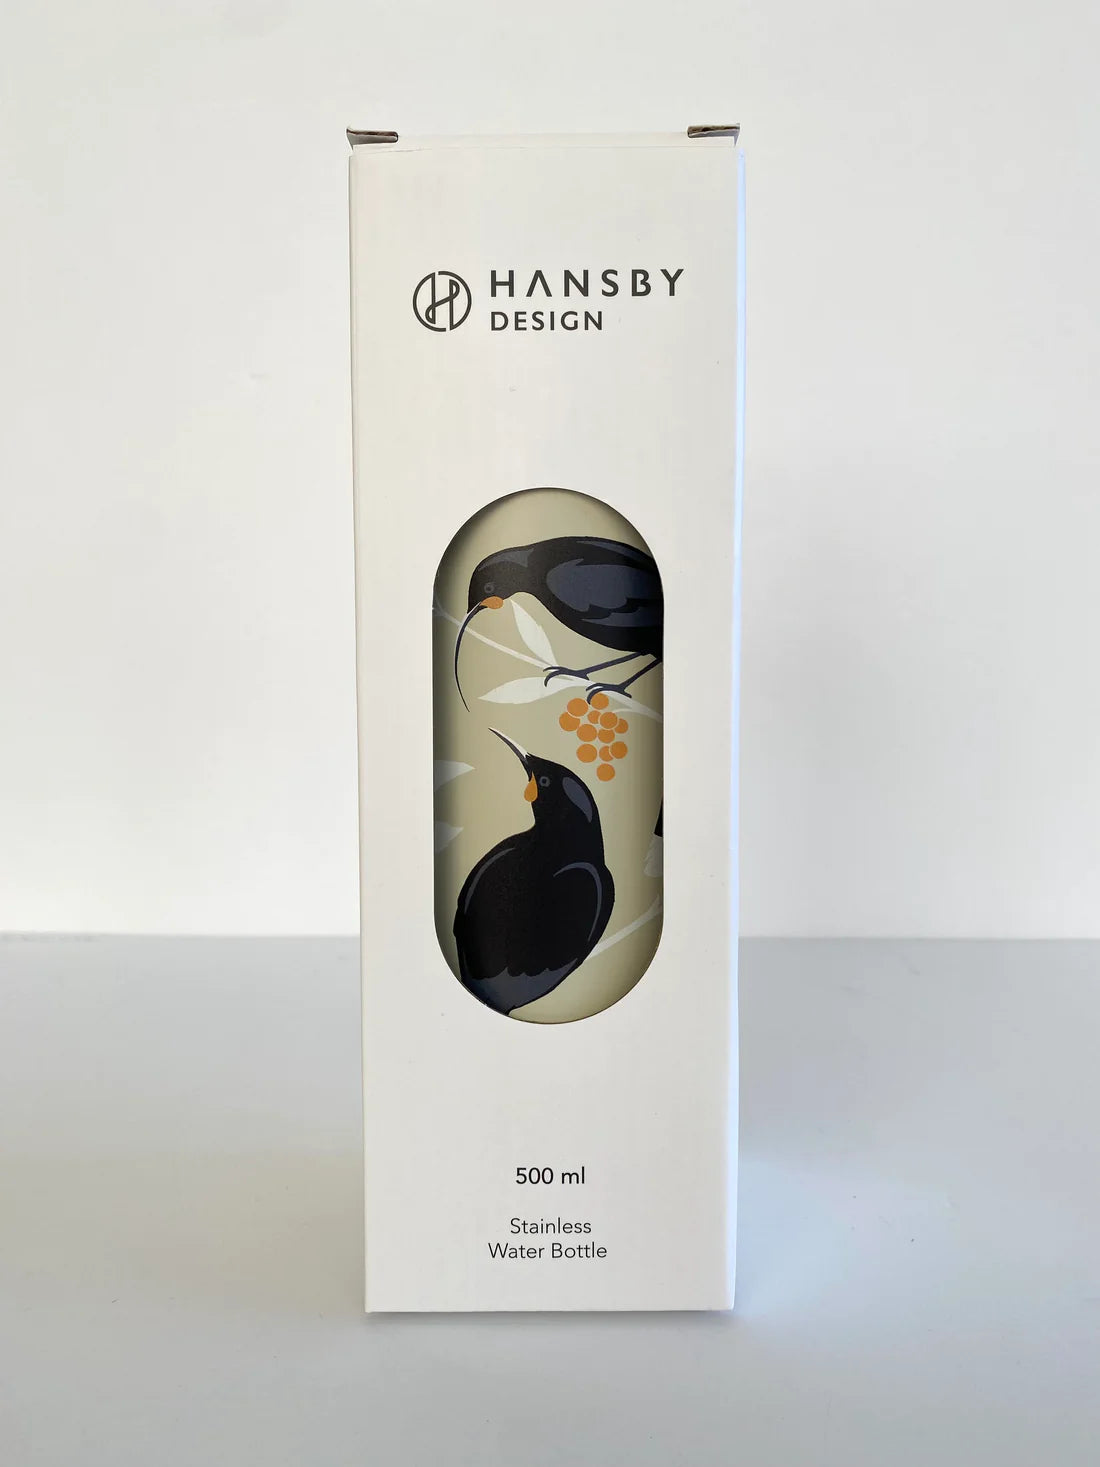 Stainless steel bottle by Hansby Design